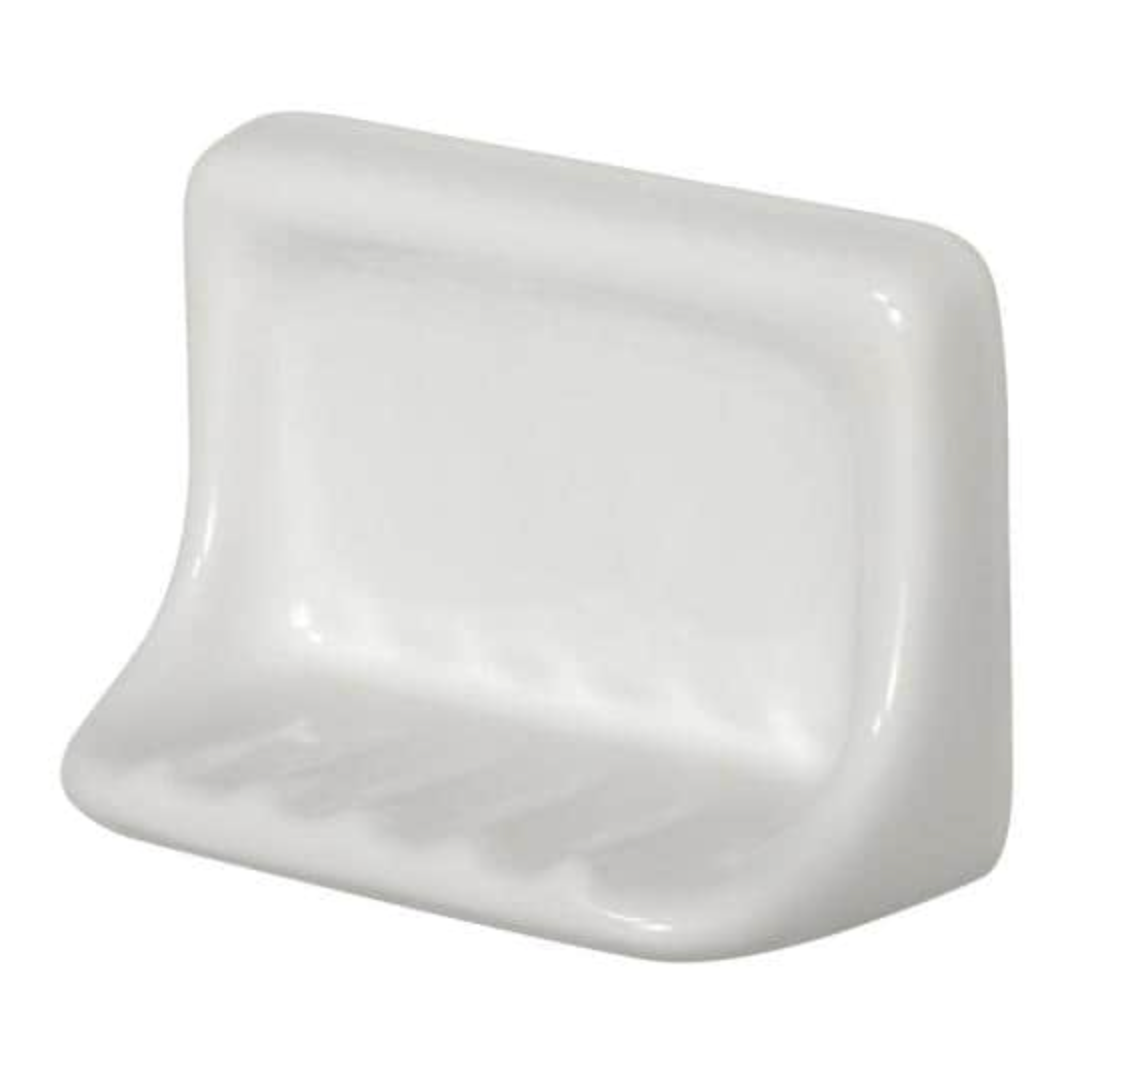 H46 Ceramic Soap Dish for Tile Showers and Baths 4 x 6 Nominal